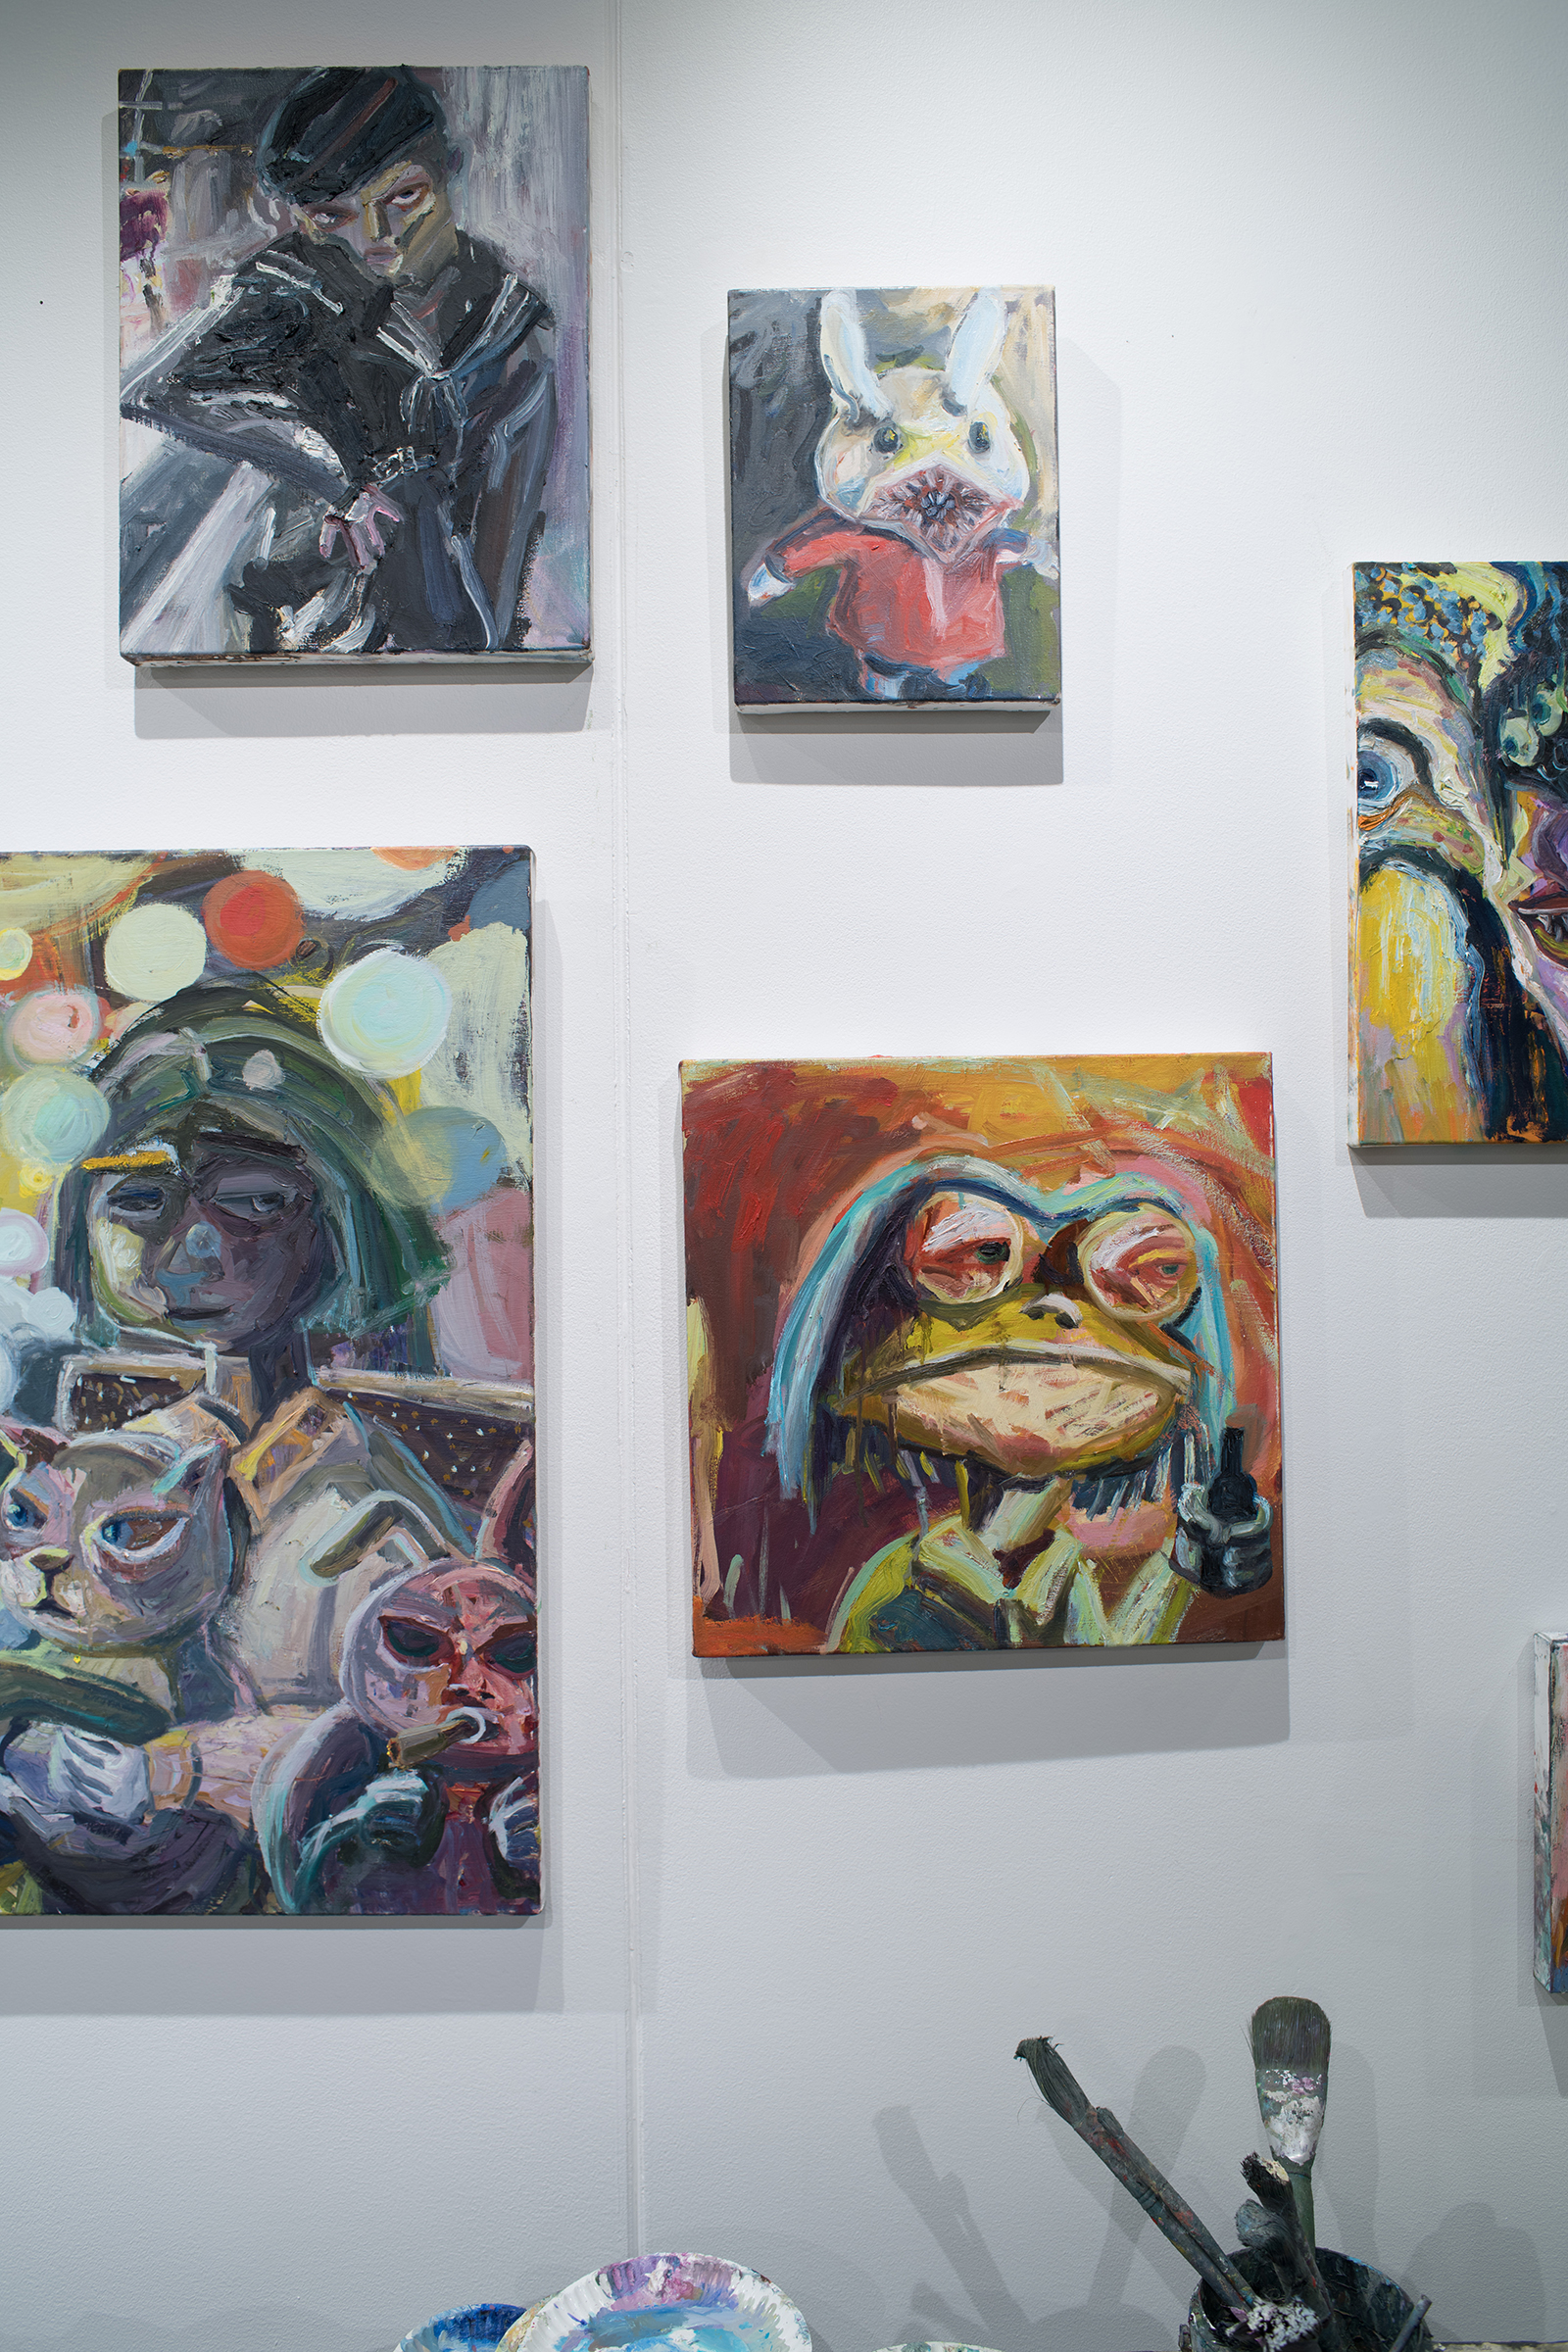 Installation view of A Cosmology of Monsters Master of Fine Arts Exhibition by Tzu Lun Hwang in the Art Lofts Gallery. Photography by Kyle Herrera.